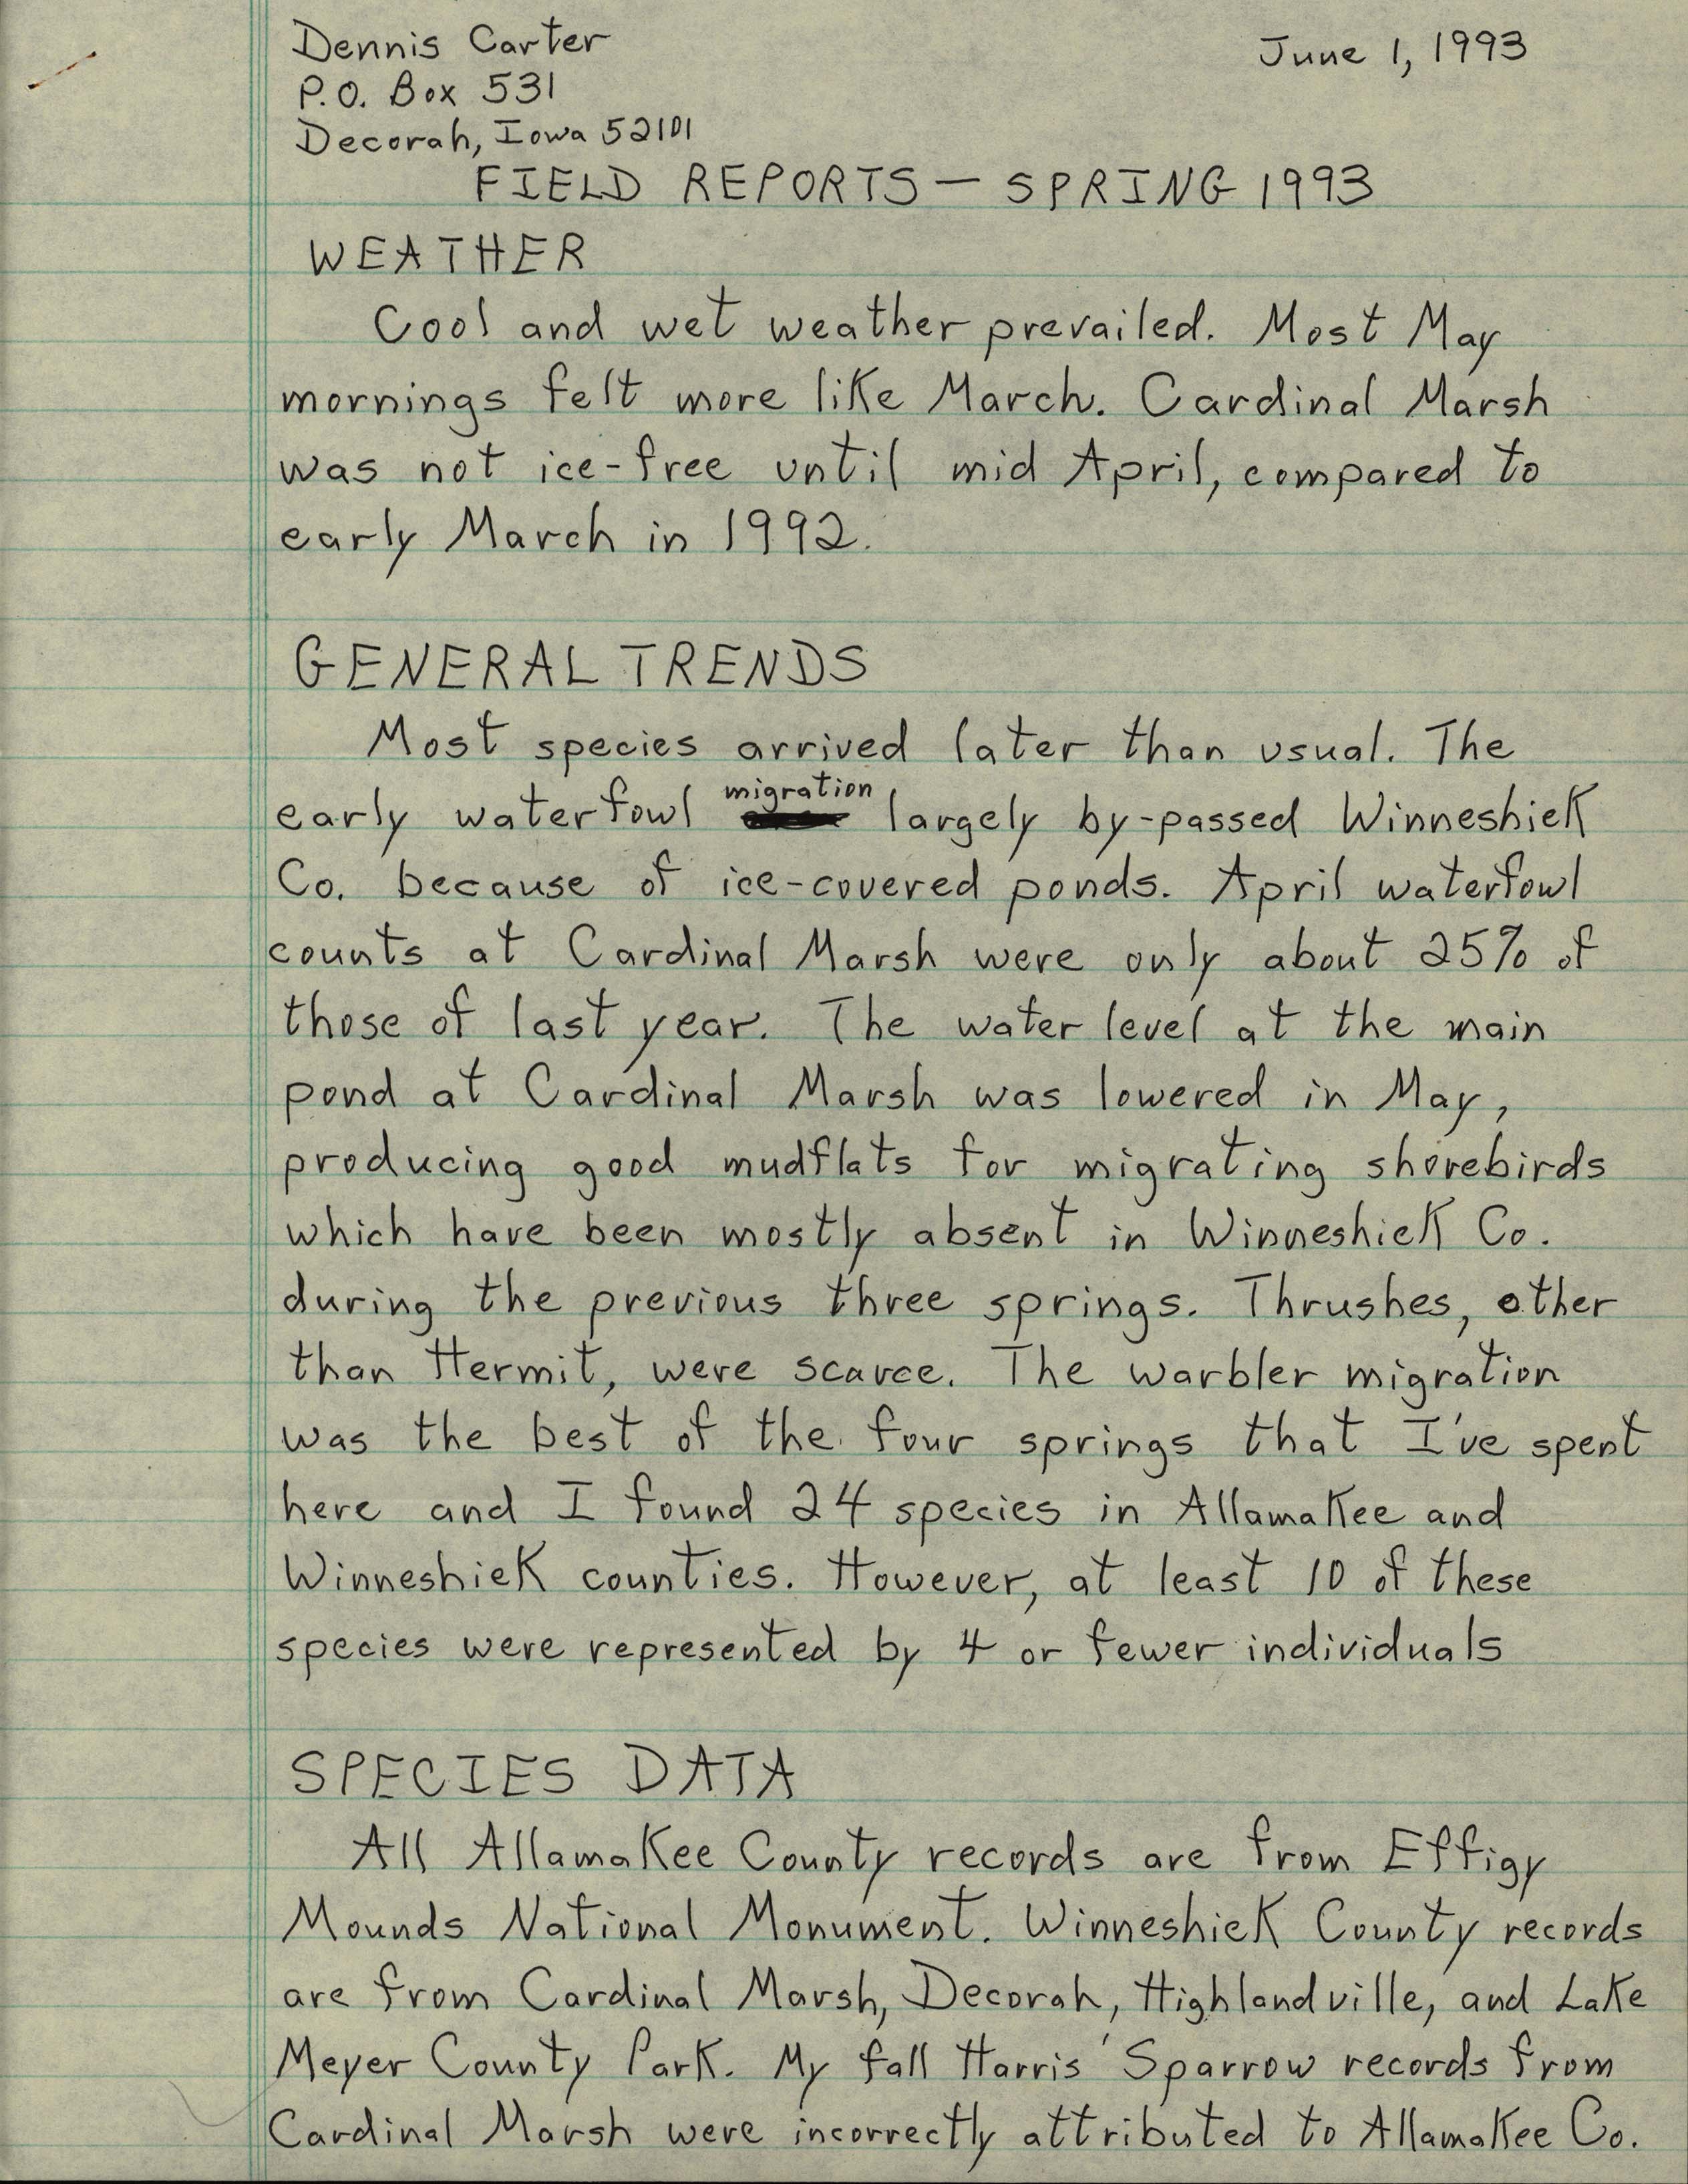 Field reports, Spring 1993, Dennis Carter